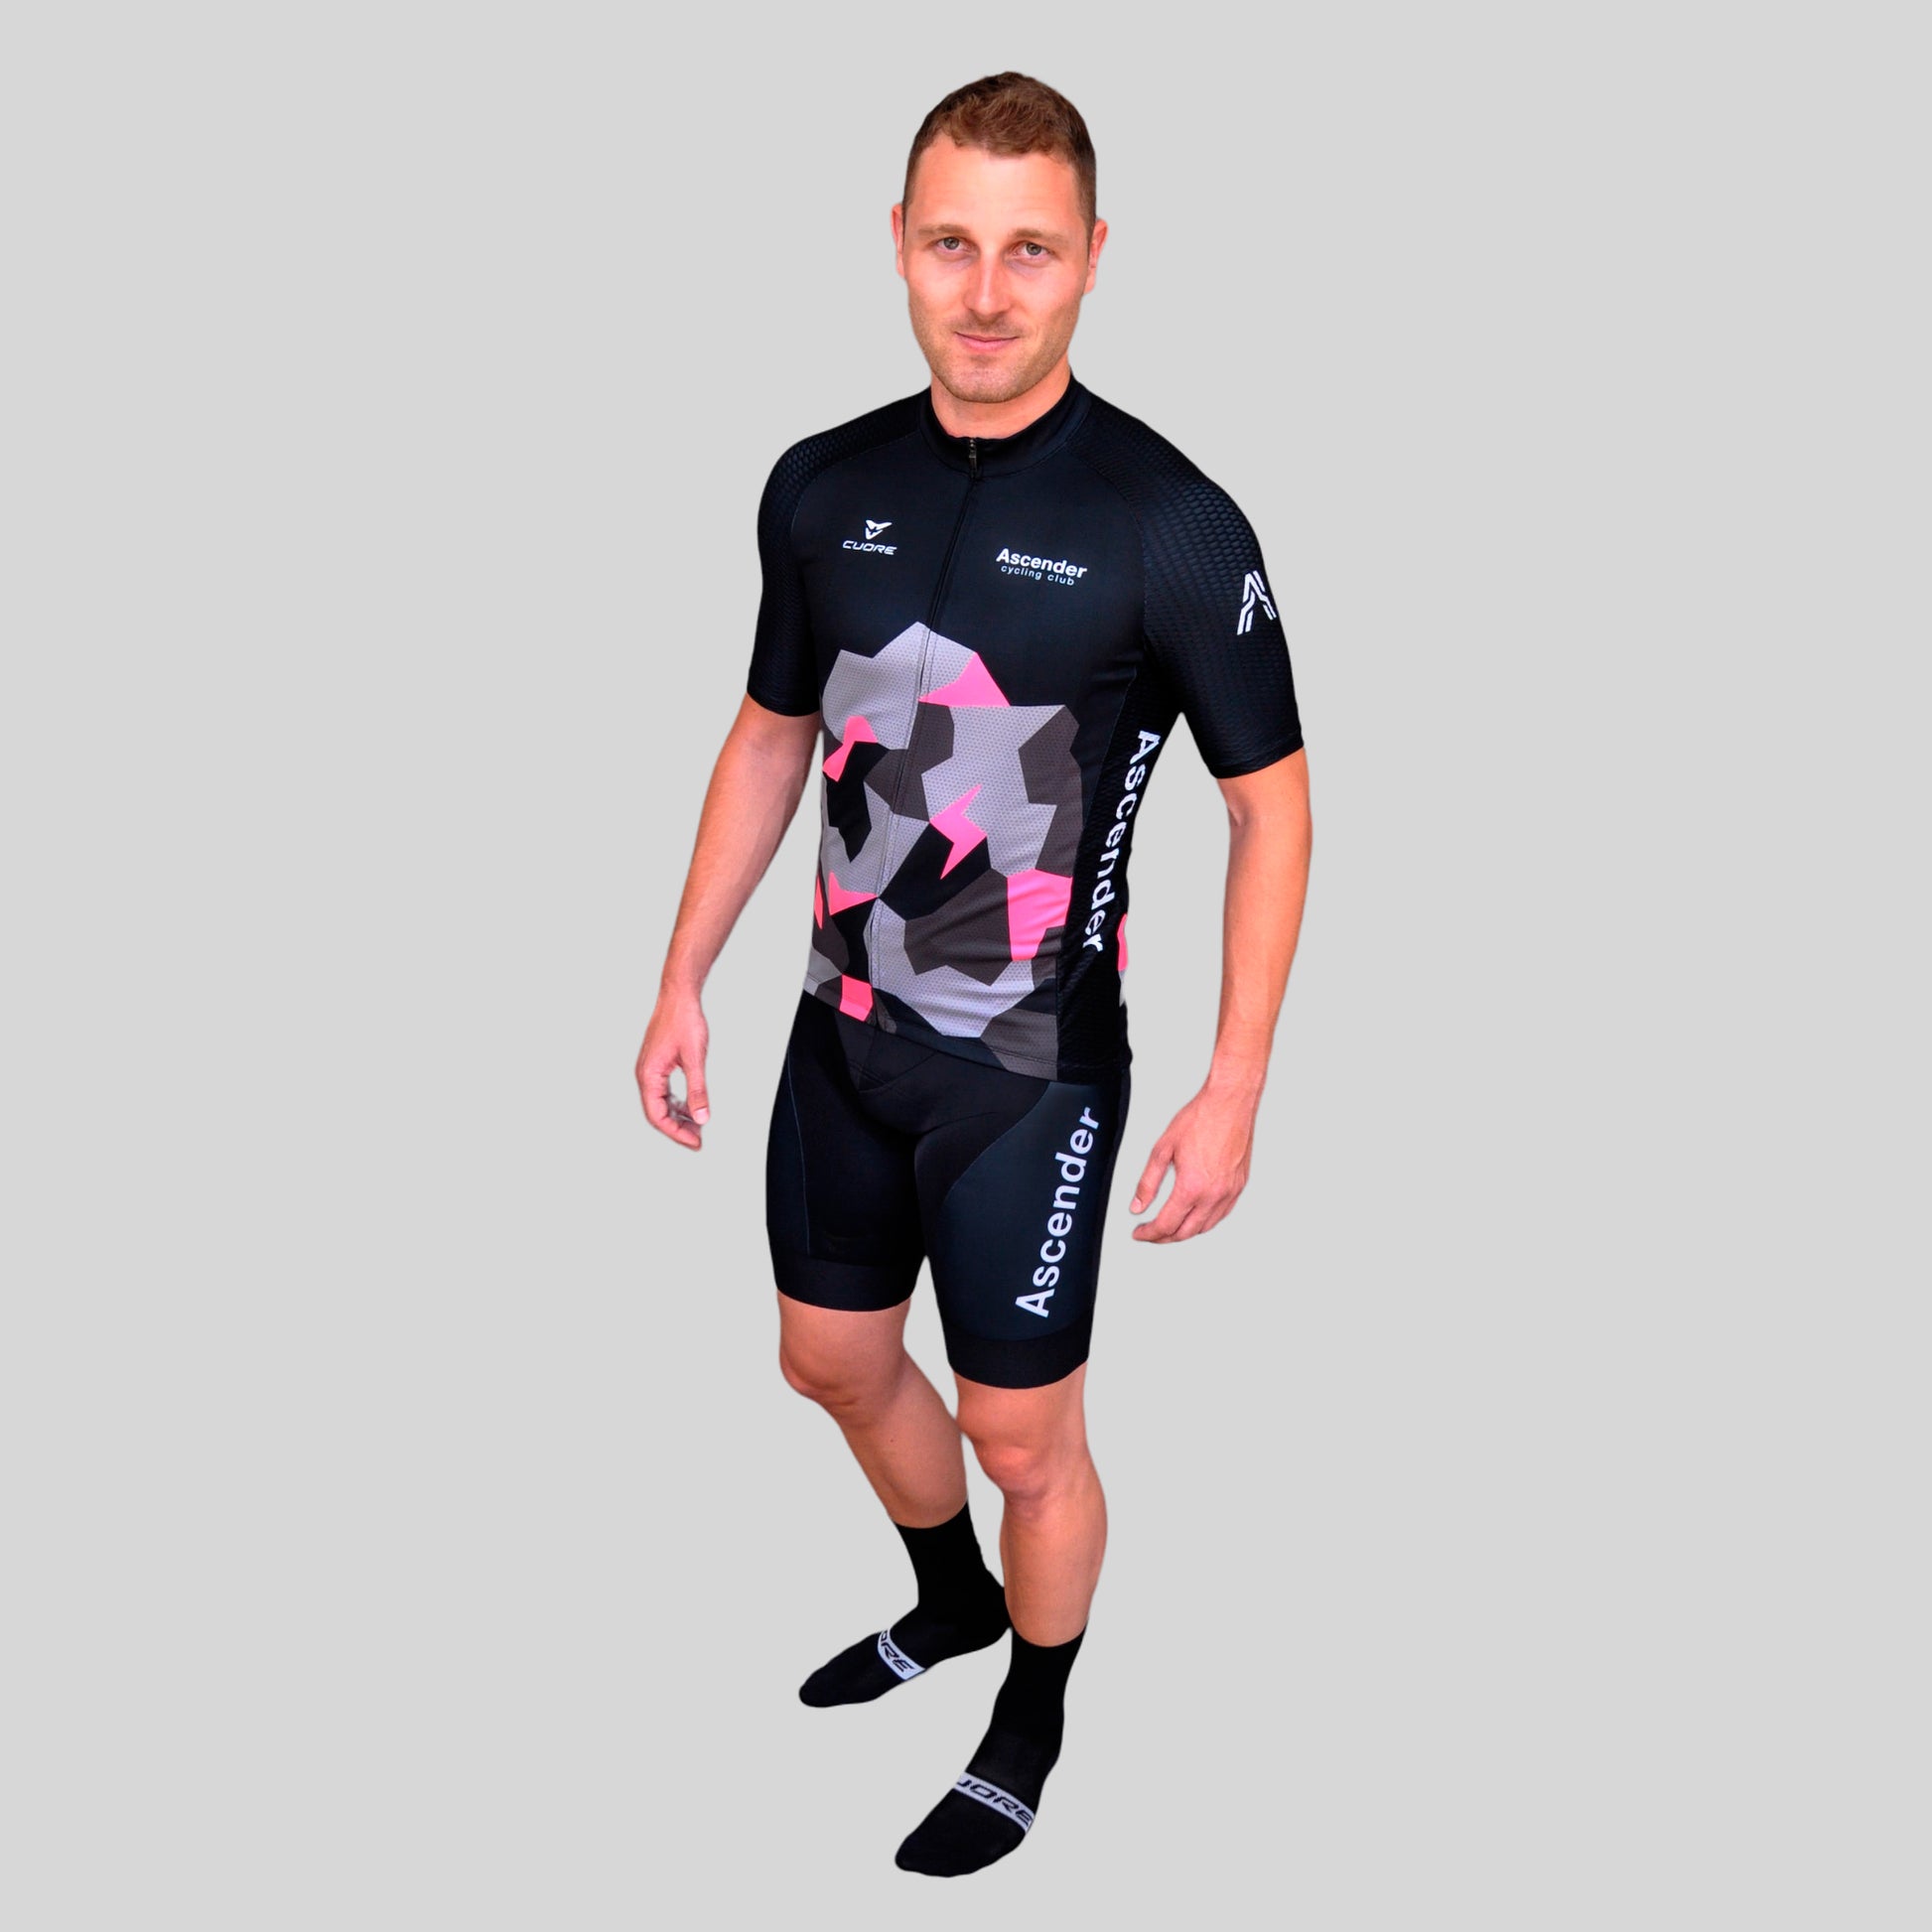 Lightning Bolt Camo Neon Pink Short Sleeves Jersey from Ascender Cycling Club Side Ascender